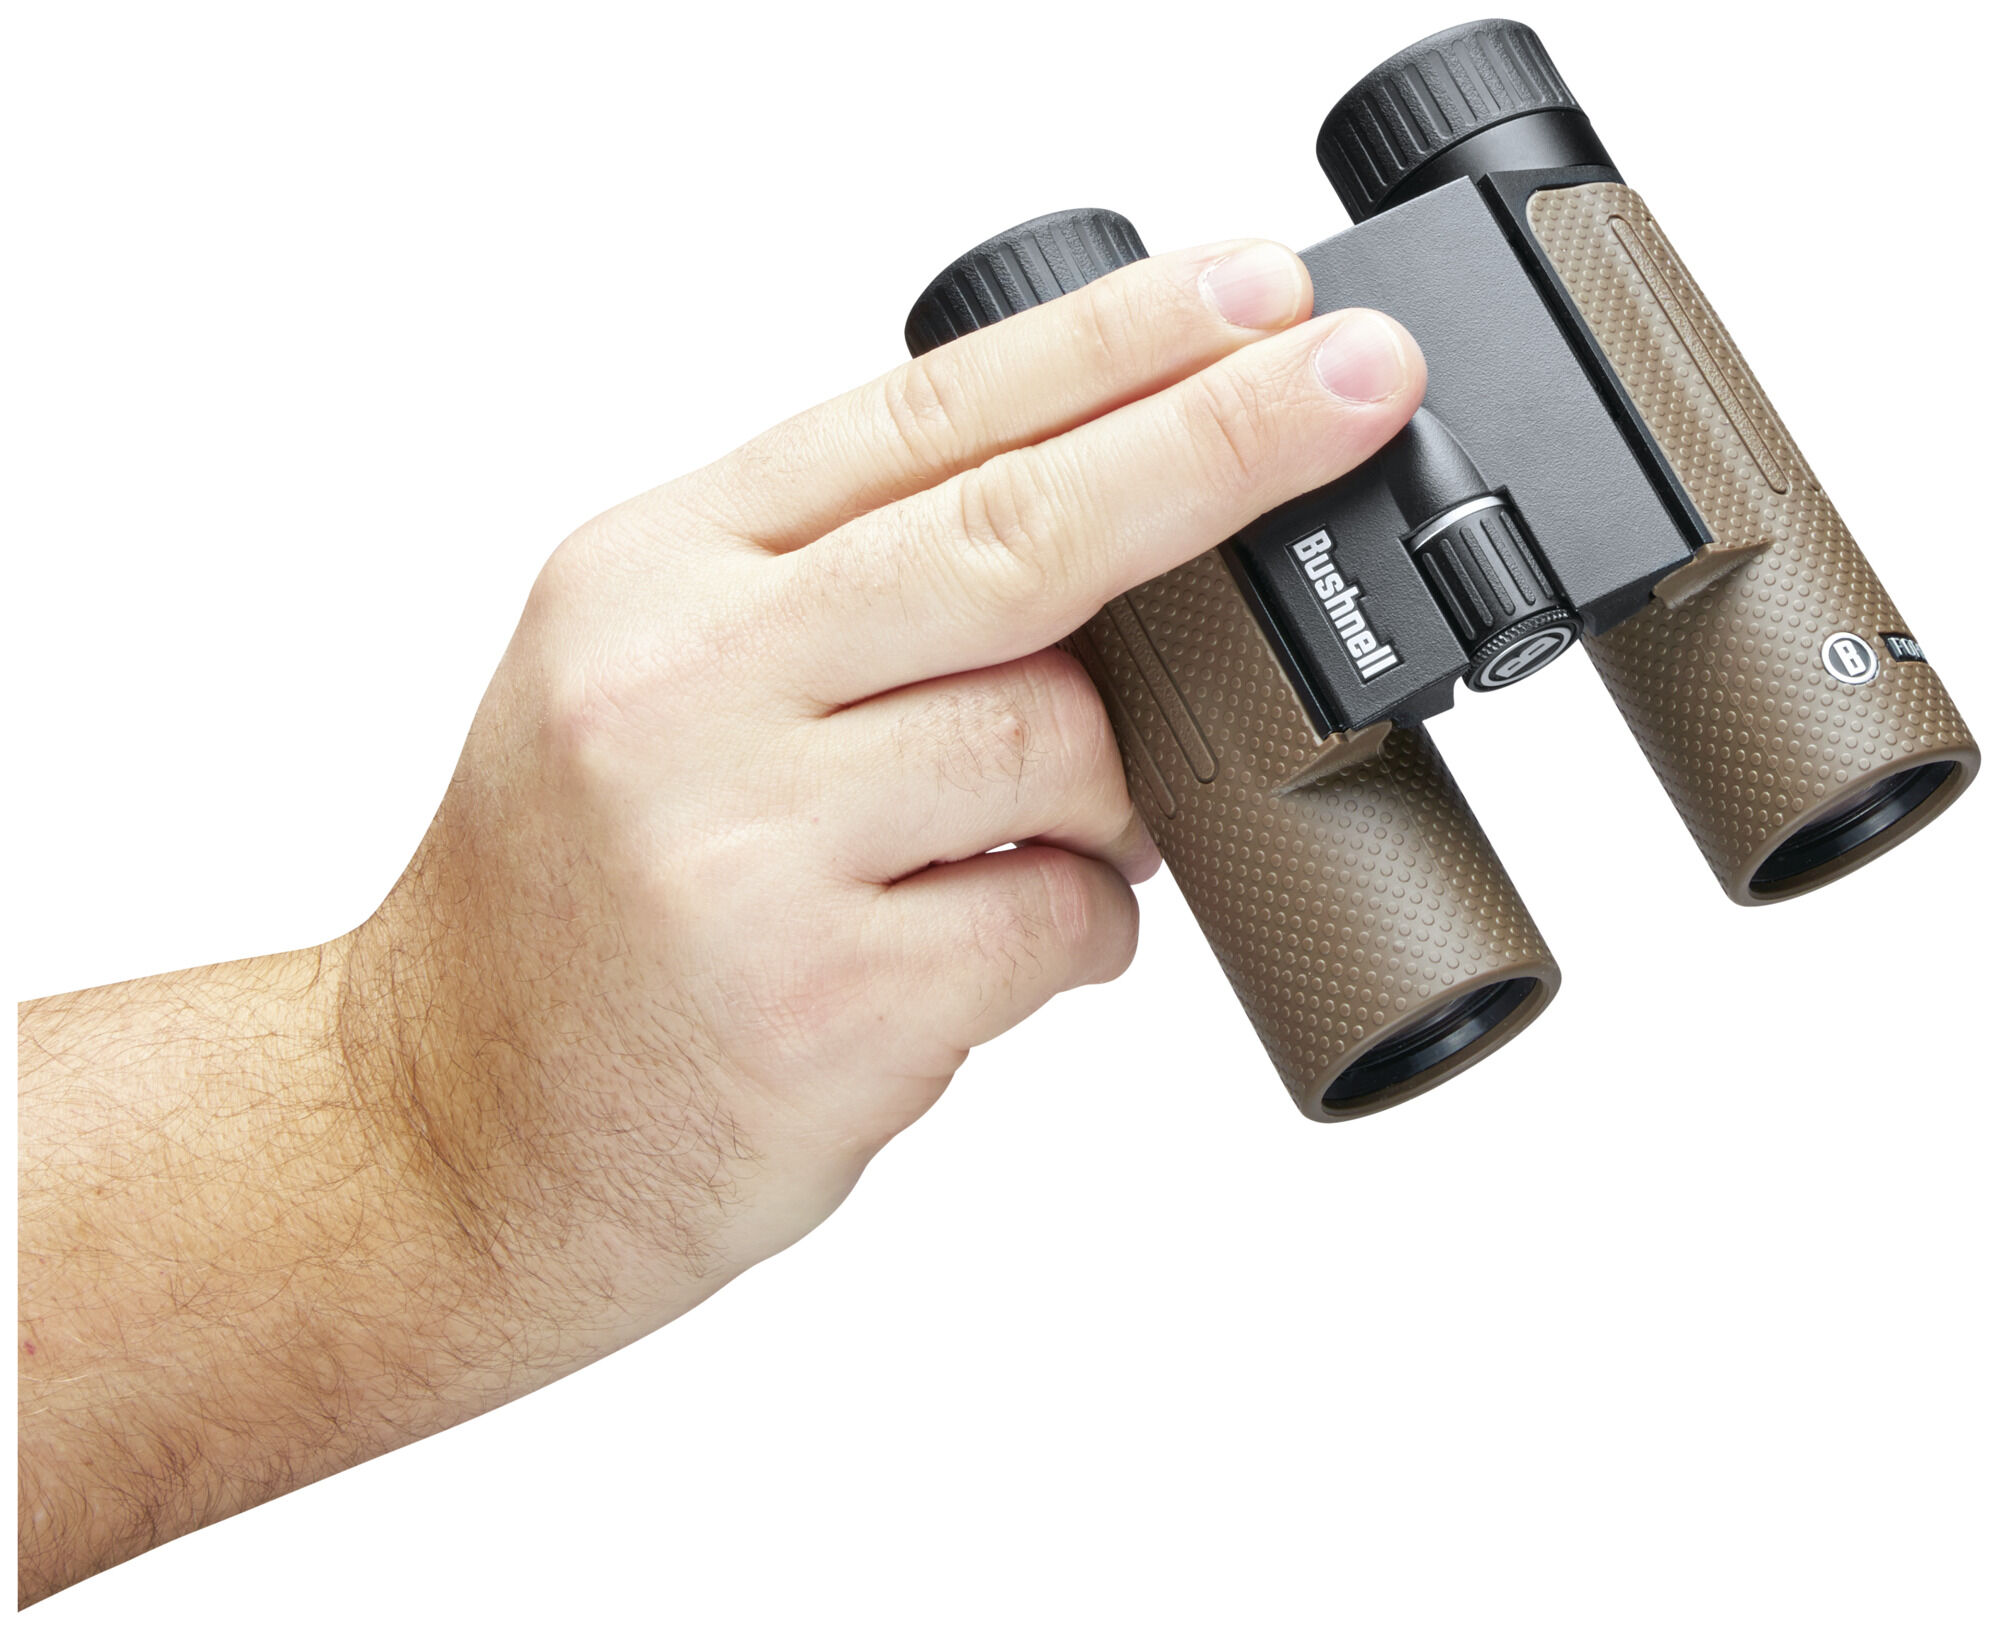 Buy Forge™ 10x30 Binoculars and More | Bushnell